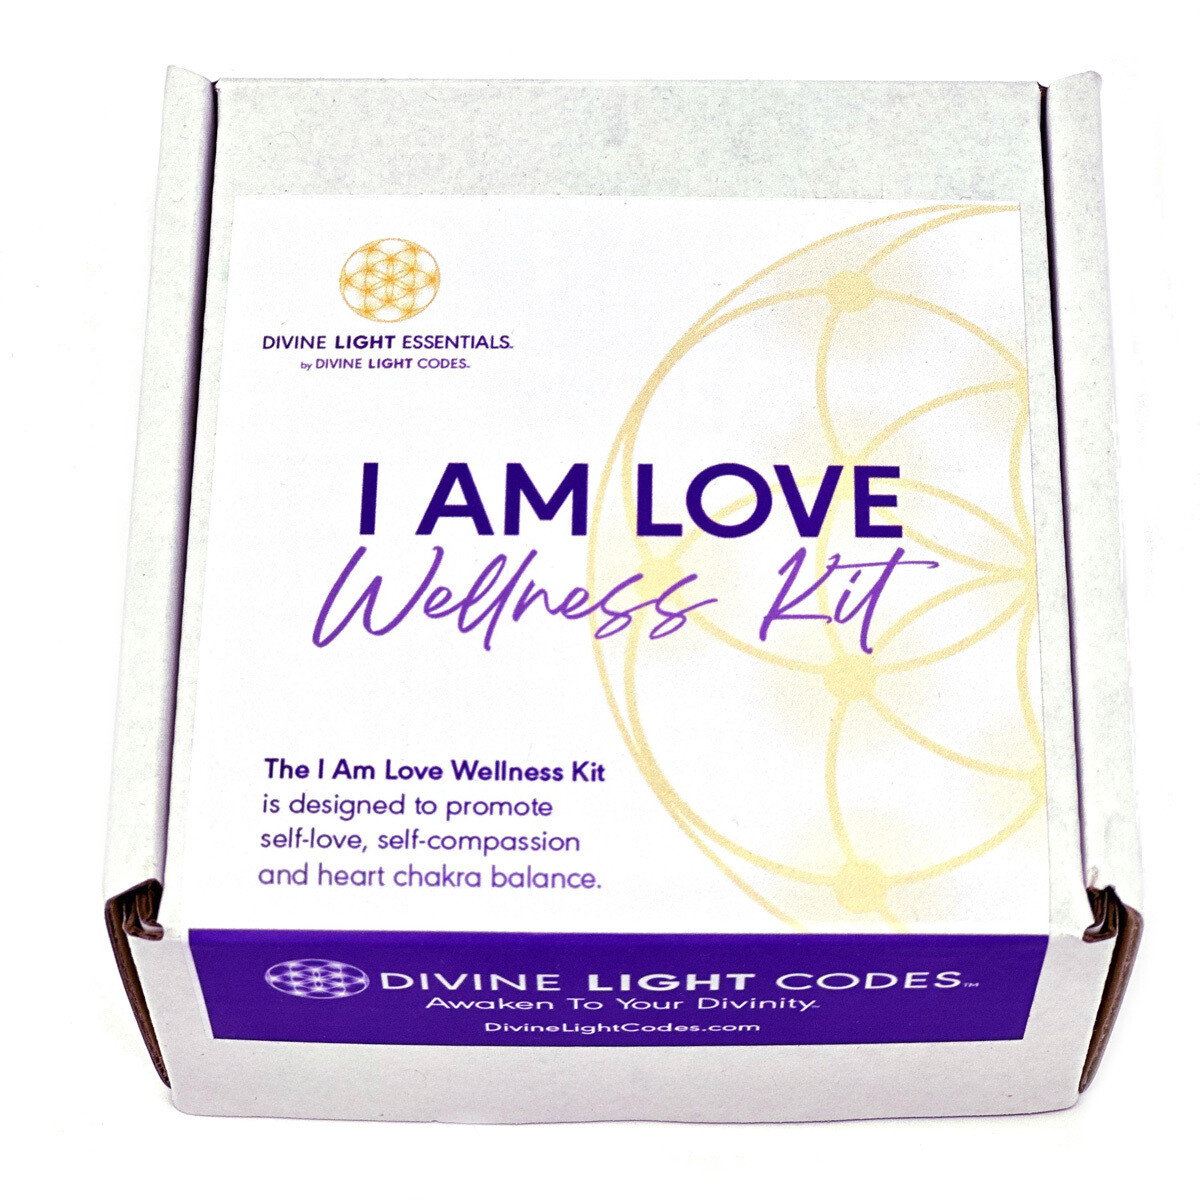 I am Love Wellness Kit - Small, Choose Your Bracelet Size: Small 6.5" (165 mm)